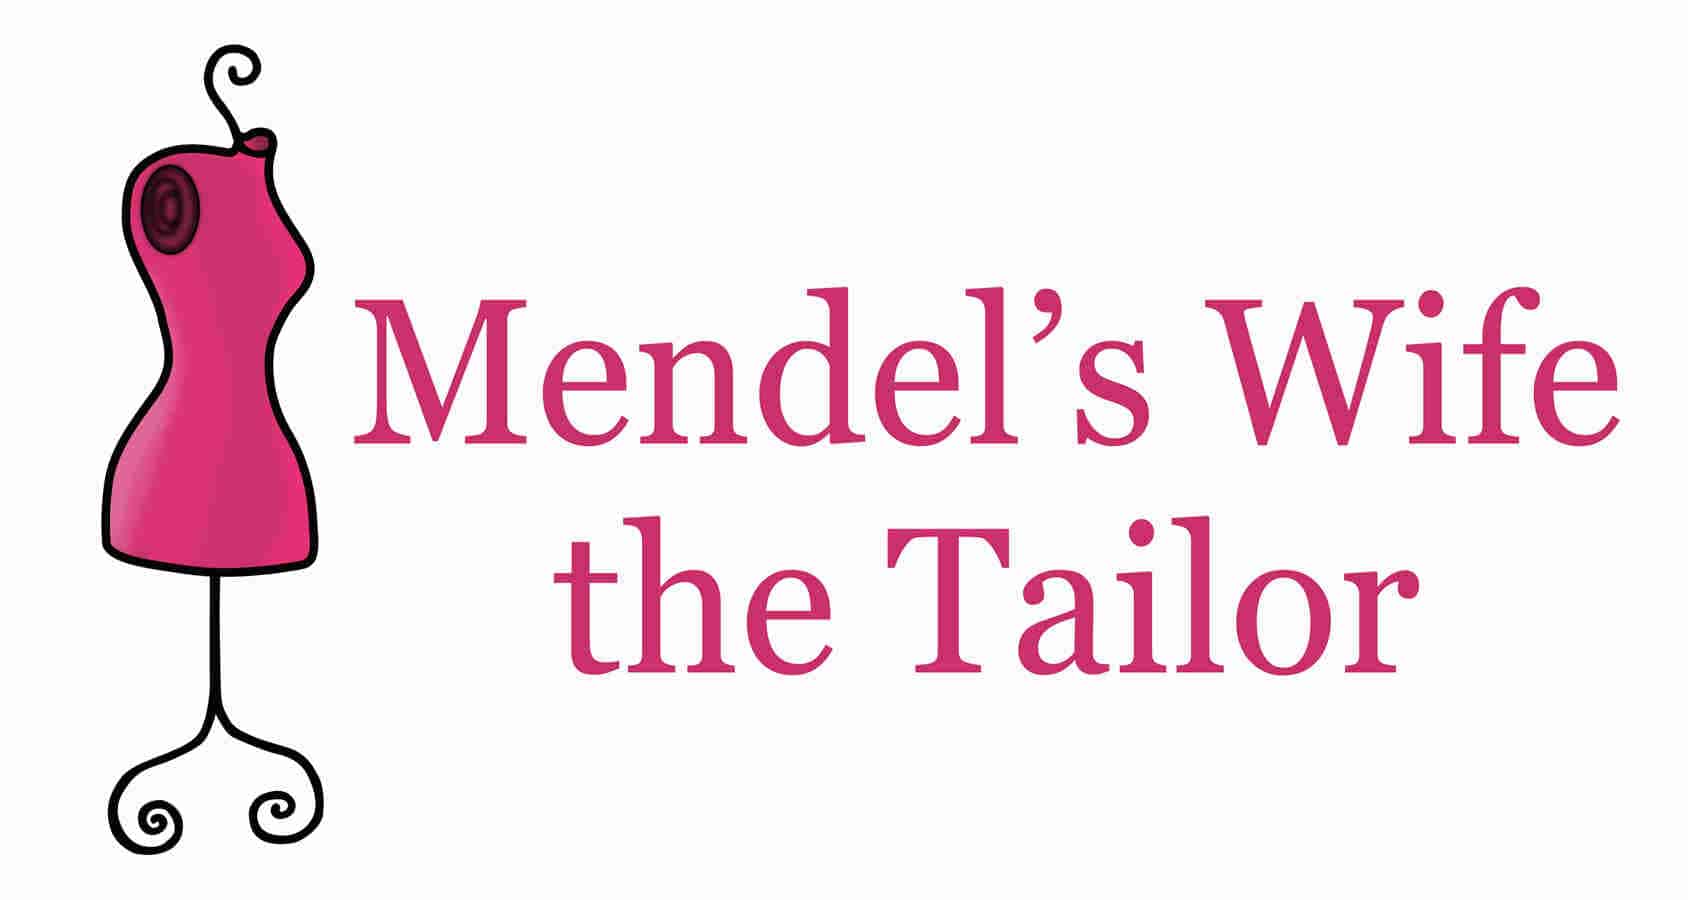 Clothing Alterations at Mendel’s Wife the Tailor